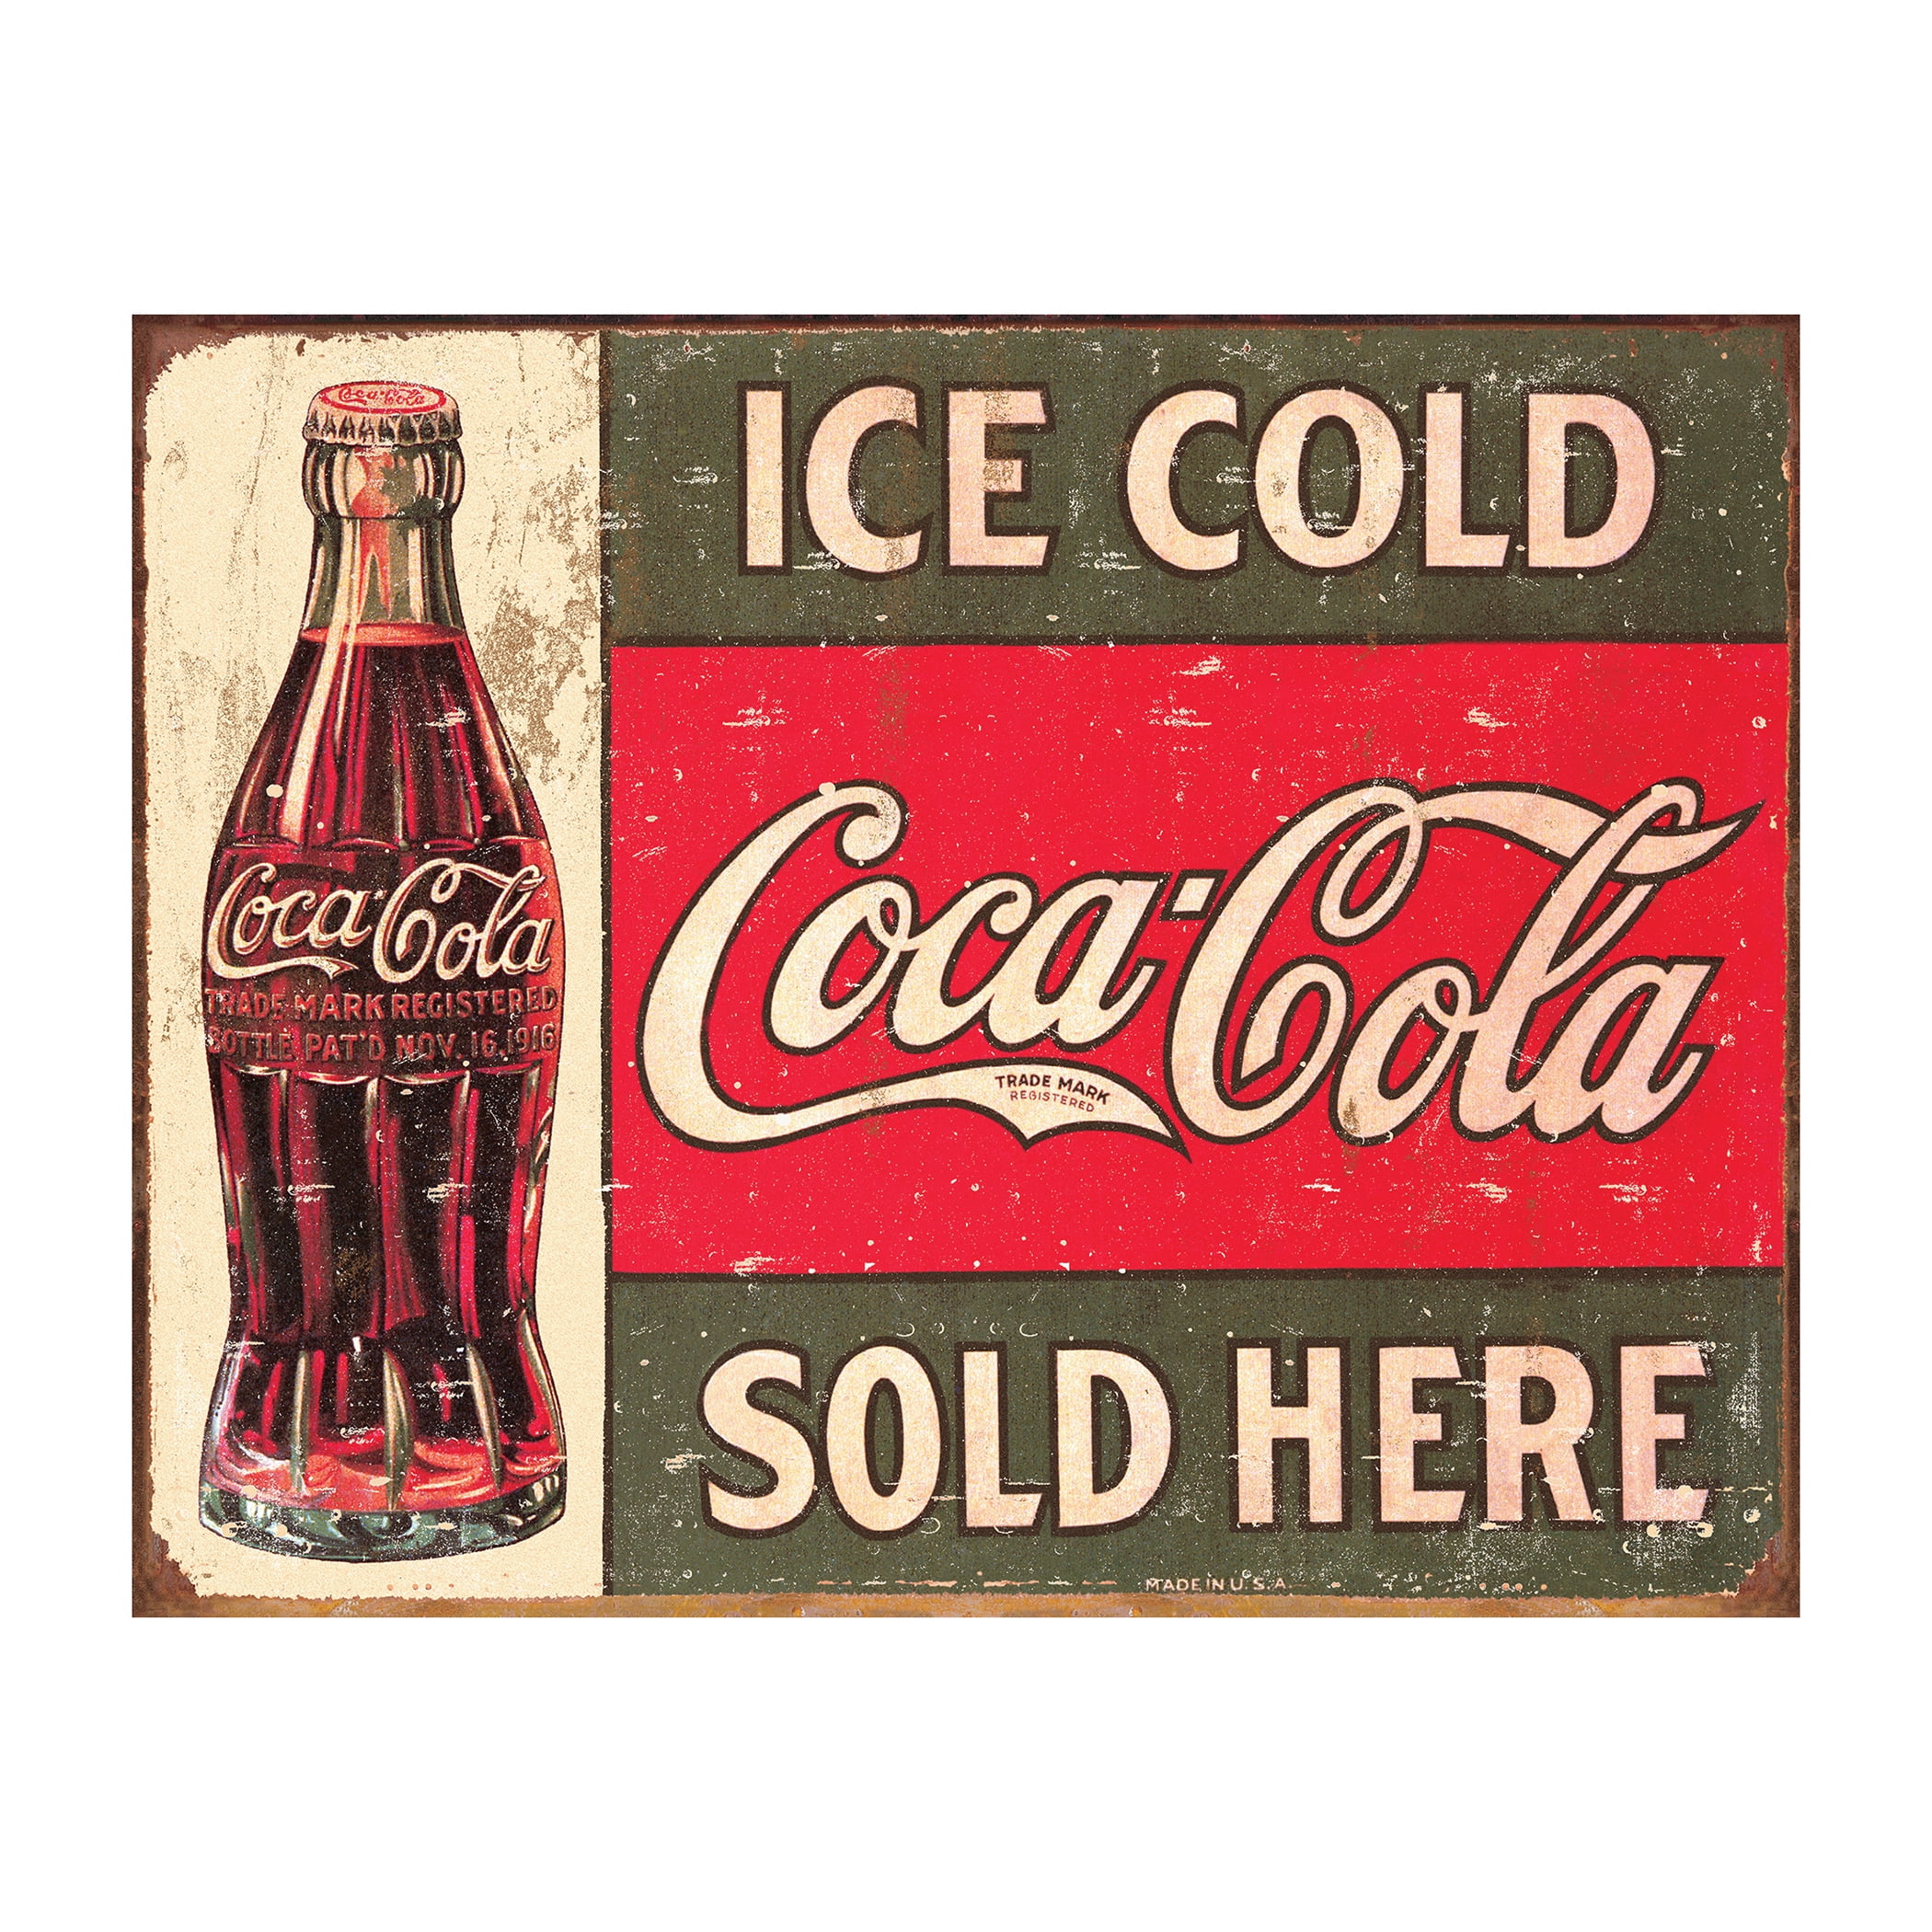 NEW-Coca-Cola Along The Highway To Anywhere Coke Vintage Look Metal Street Sign 